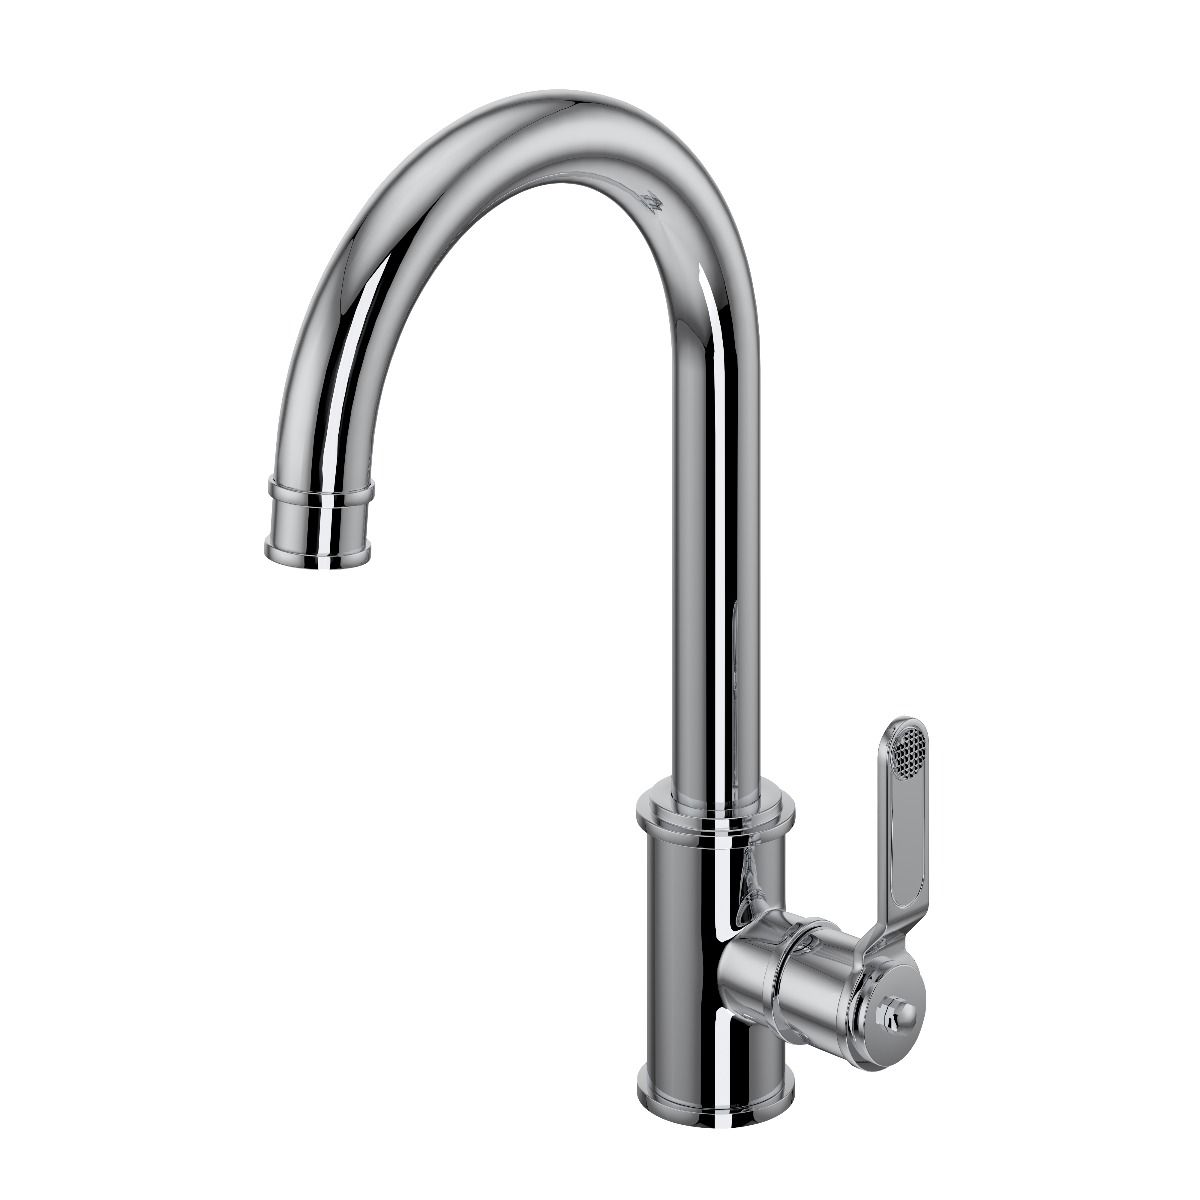 Armstrong Monobloc Mixer Tap With Textured Handle and single lever in Polished Chrome – Perrin & Rowe